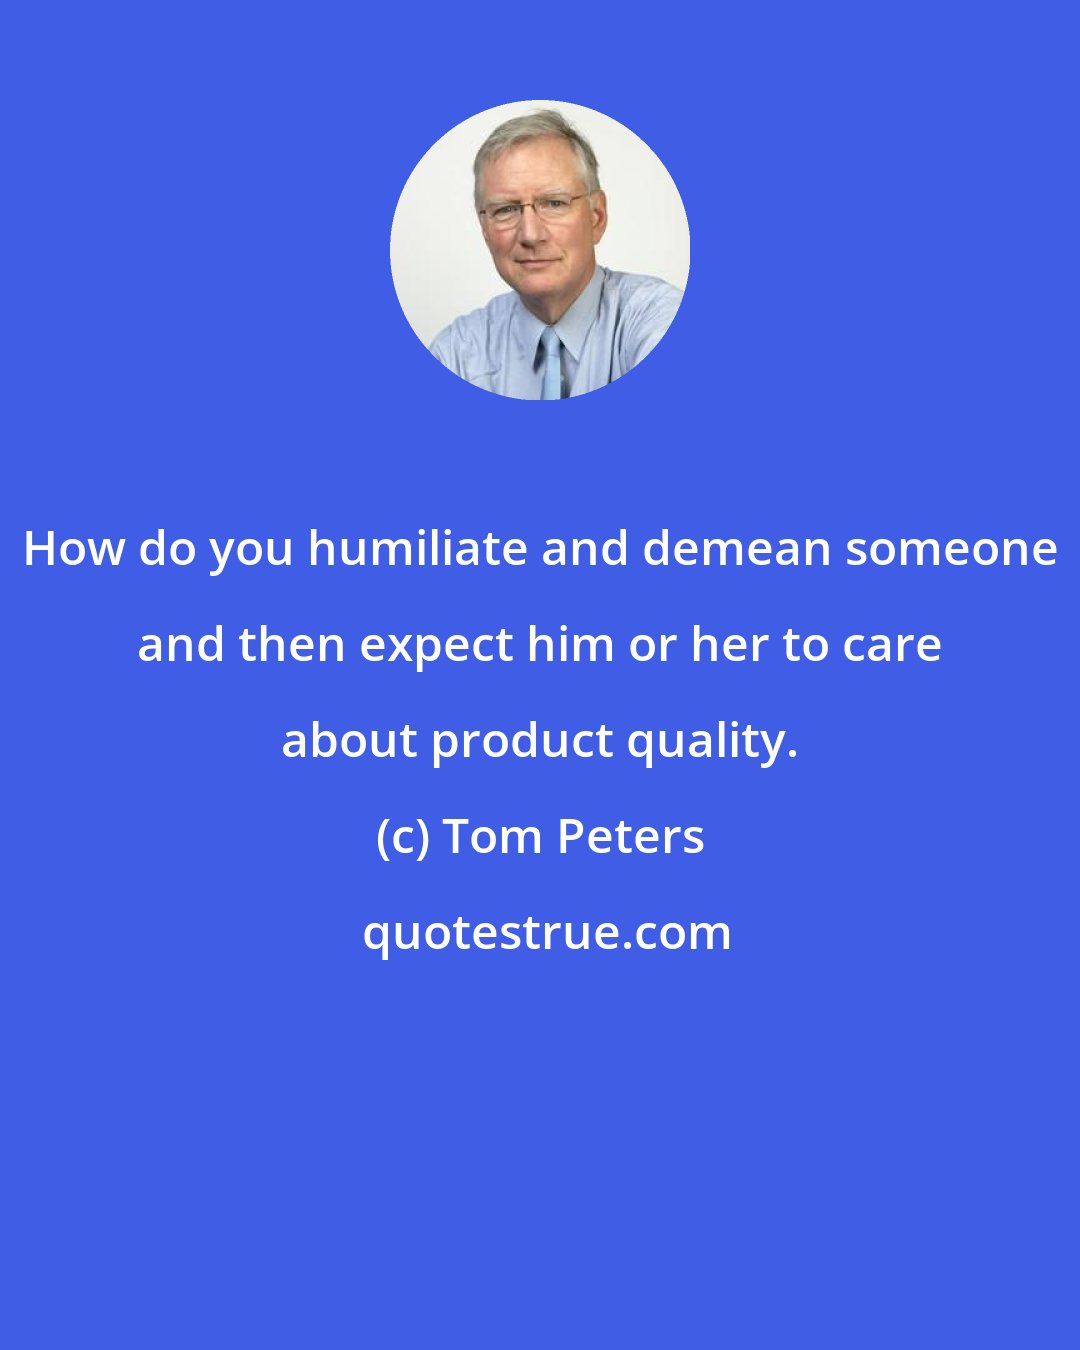 Tom Peters: How do you humiliate and demean someone and then expect him or her to care about product quality.